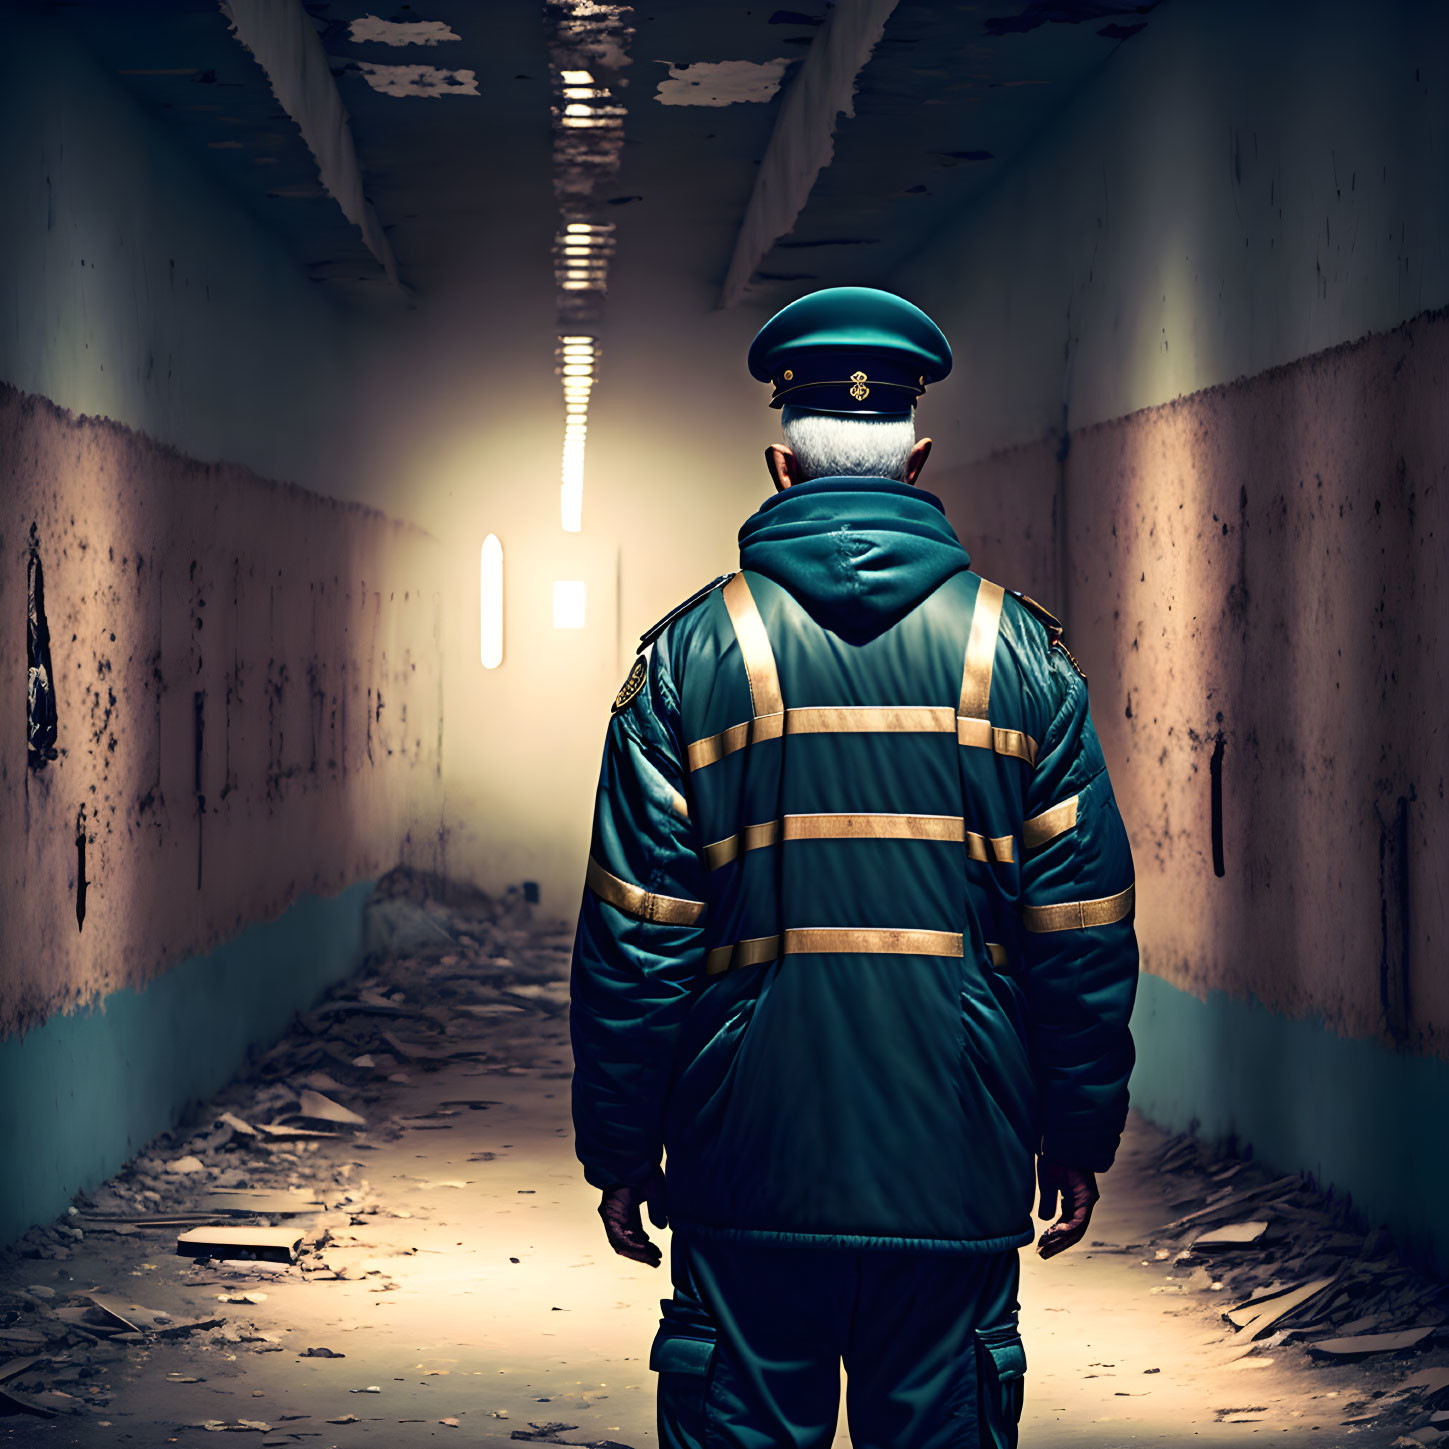 Security guard in reflective jacket in derelict hallway with debris and light source.